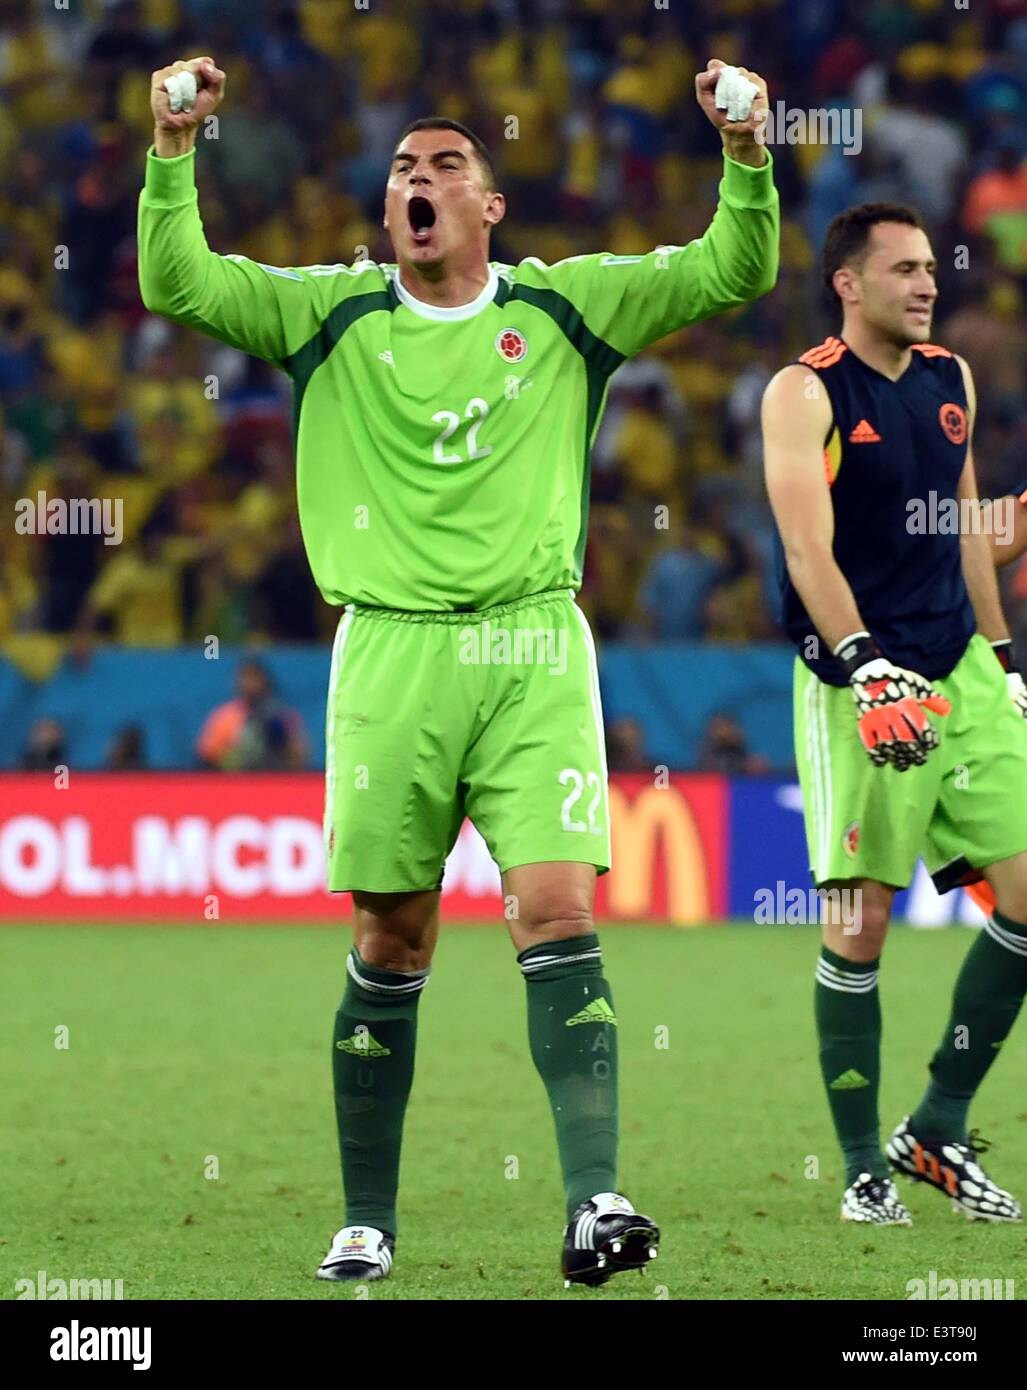 Rio De Janeiro, Brazil. 28th June, 2014. Colombia's goalkeeper Faryd Mondragon celebrates the victory after a Round of 16 match between Colombia and Uruguay of 2014 FIFA World Cup at the Estadio do Maracana Stadium in Rio de Janeiro, Brazil, on June 28, 2014. Colombia won 2-0 over Uruguay on Saturday. Credit:  Wang Yuguo/Xinhua/Alamy Live News Stock Photo